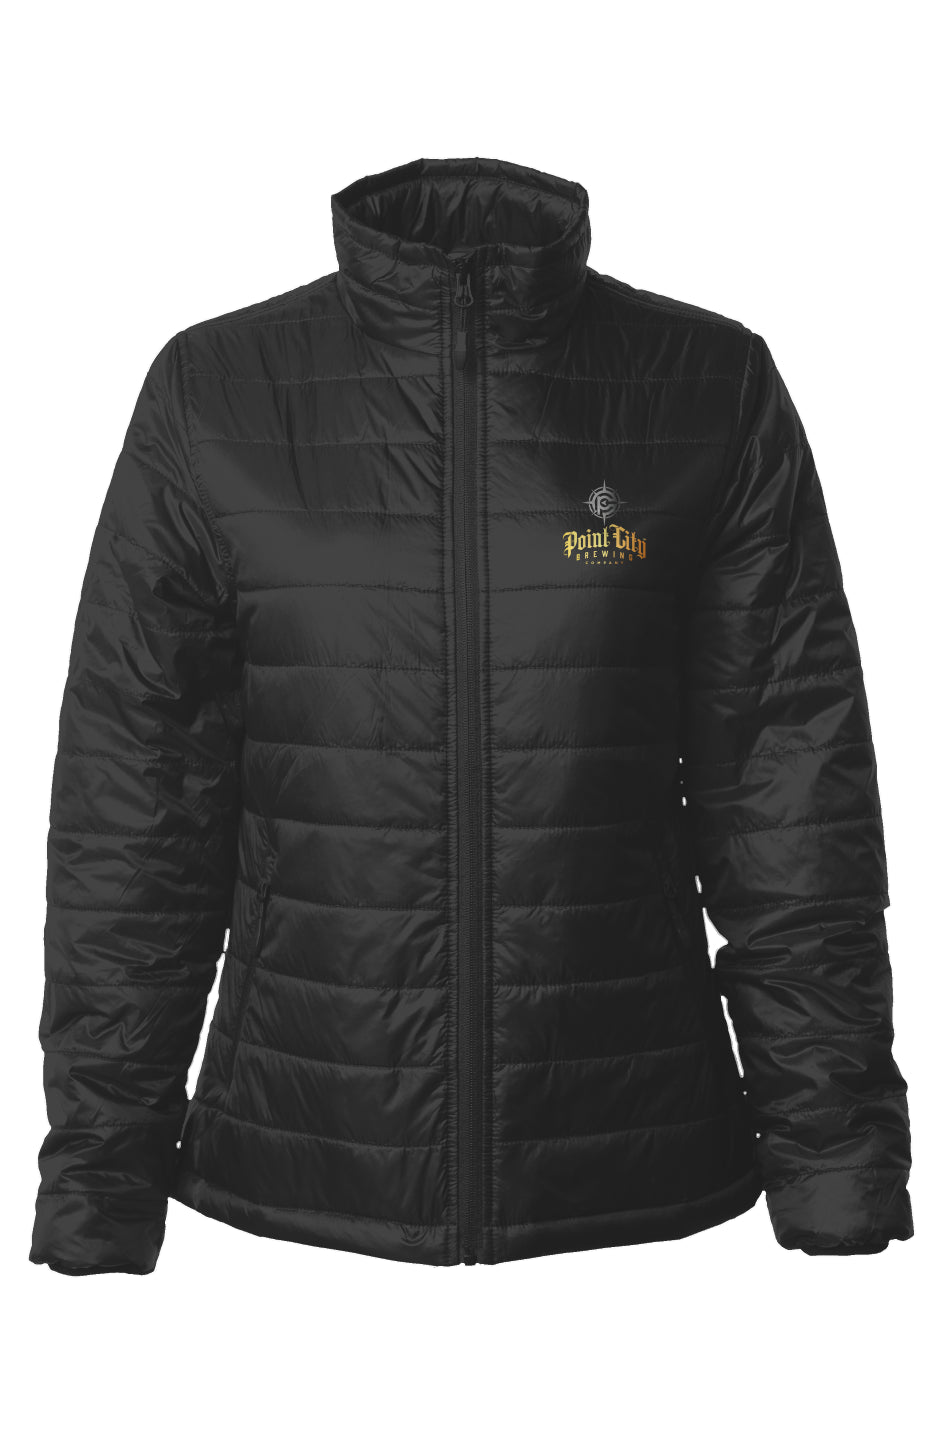 Womens Puffer Jacket - Point City Brewing Company